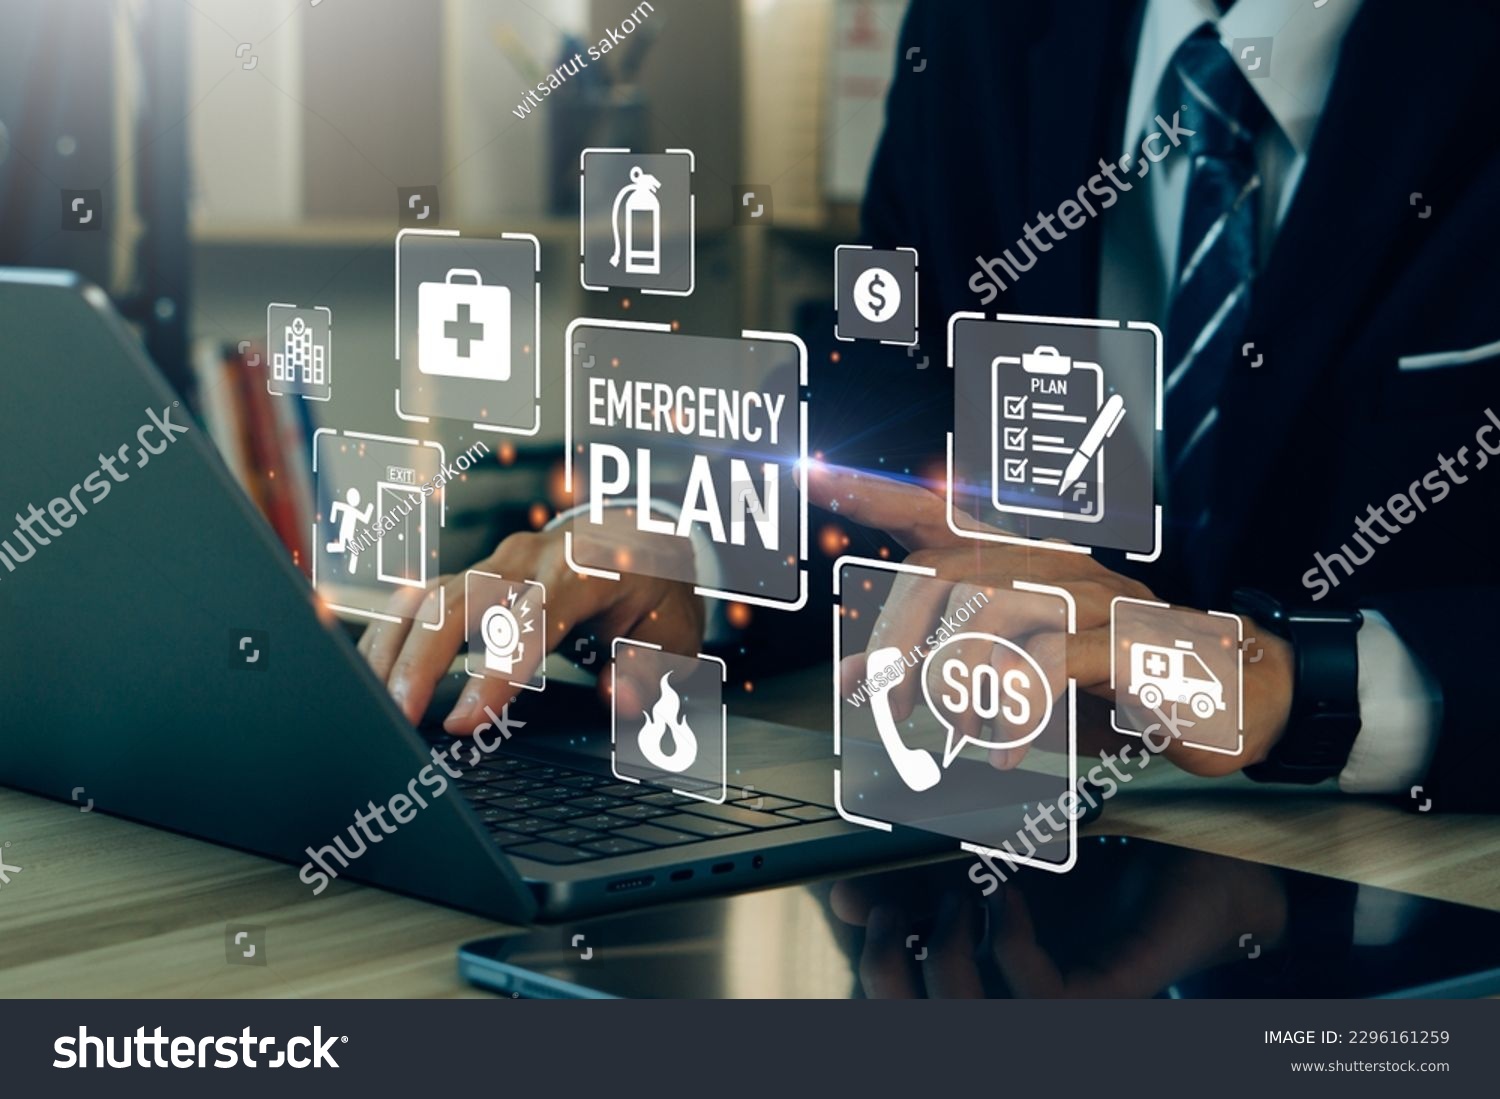 Concept of Emergency Preparedness Plan.Businessman touching Emergency Plan icon to learn and prepare in emergency situation .Business Evacuation Training concept. #2296161259